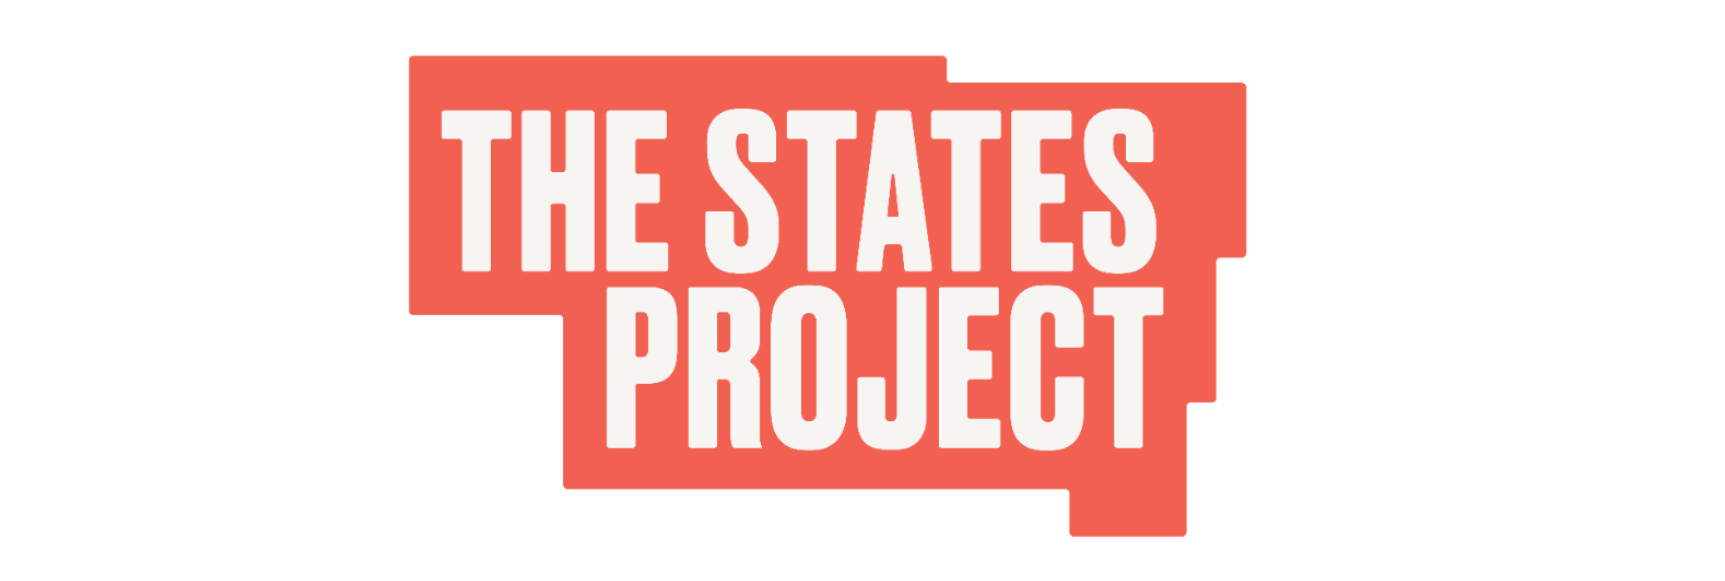 The States Project Logo